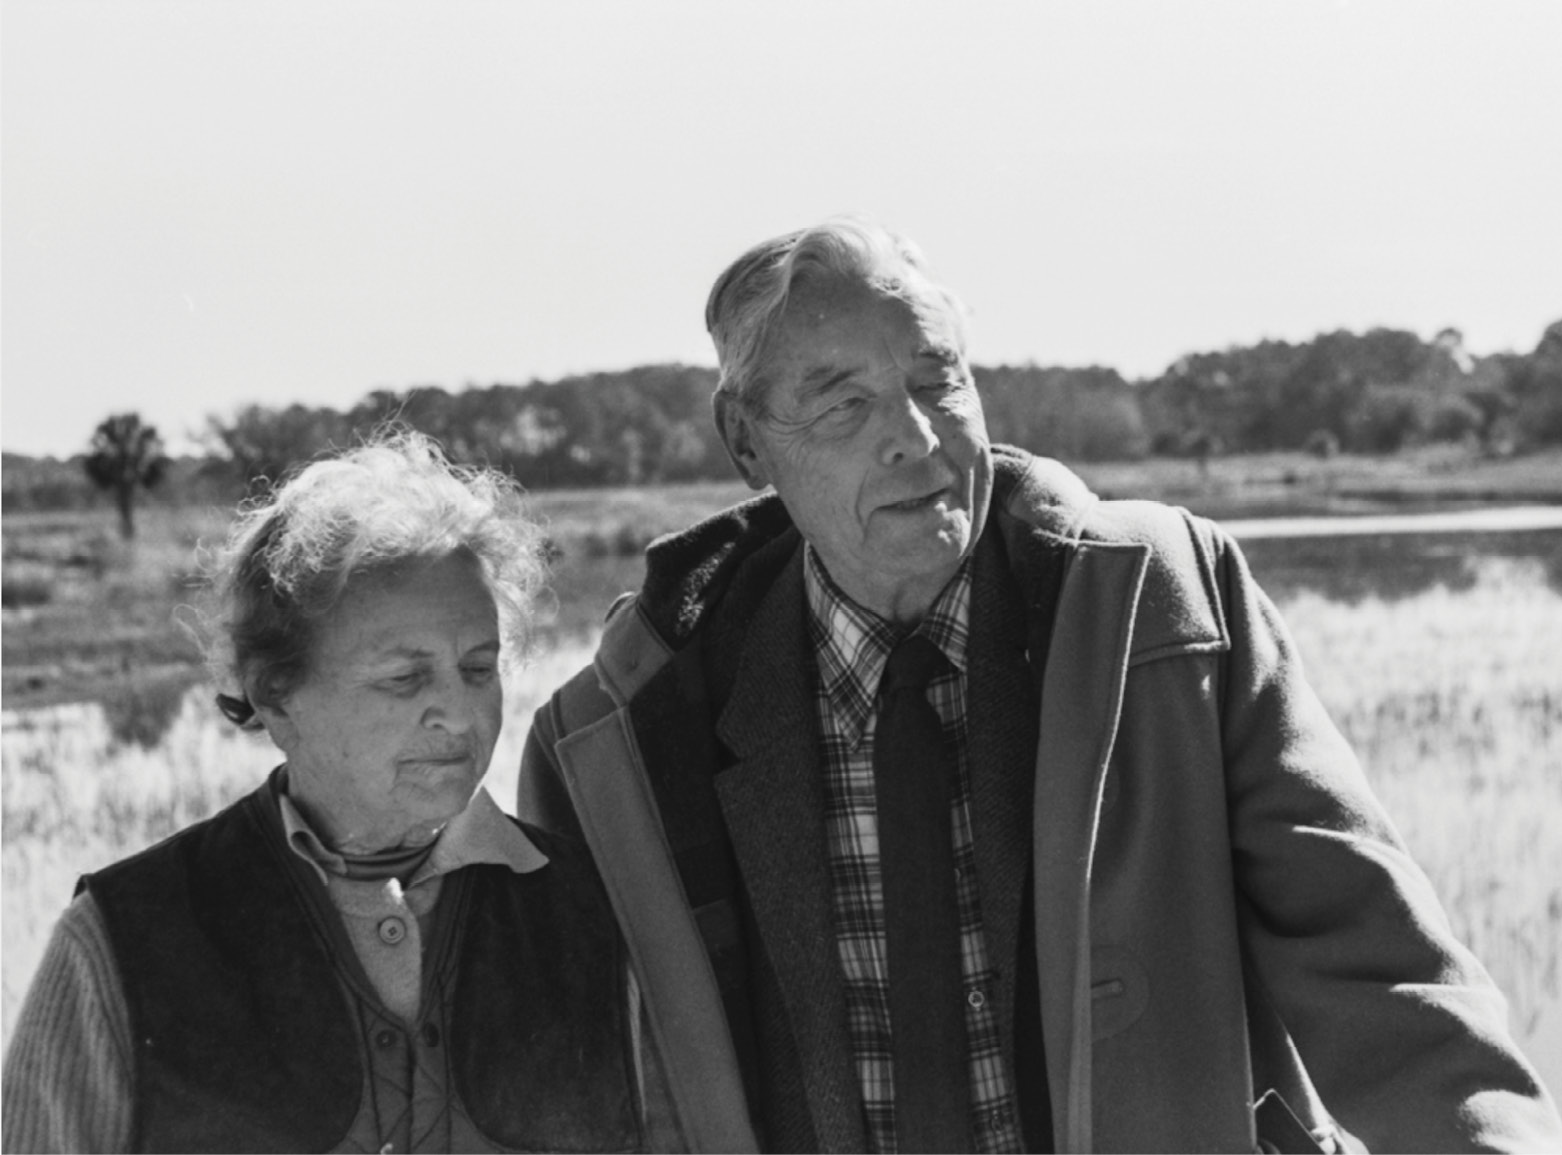 Dorothy and Gaylord Donnelley, pictured here at their Ashepoo retreat, were avid hunters and dedicated conservationists. “They lived out their civic ethics at Ashepoo,” says their granddaughter Ceara. The Gaylord &amp; Dorothy Foundation continues to support the arts and land conservation in the Lowcountry and Chicago, granting more than $8 million in funding annually.